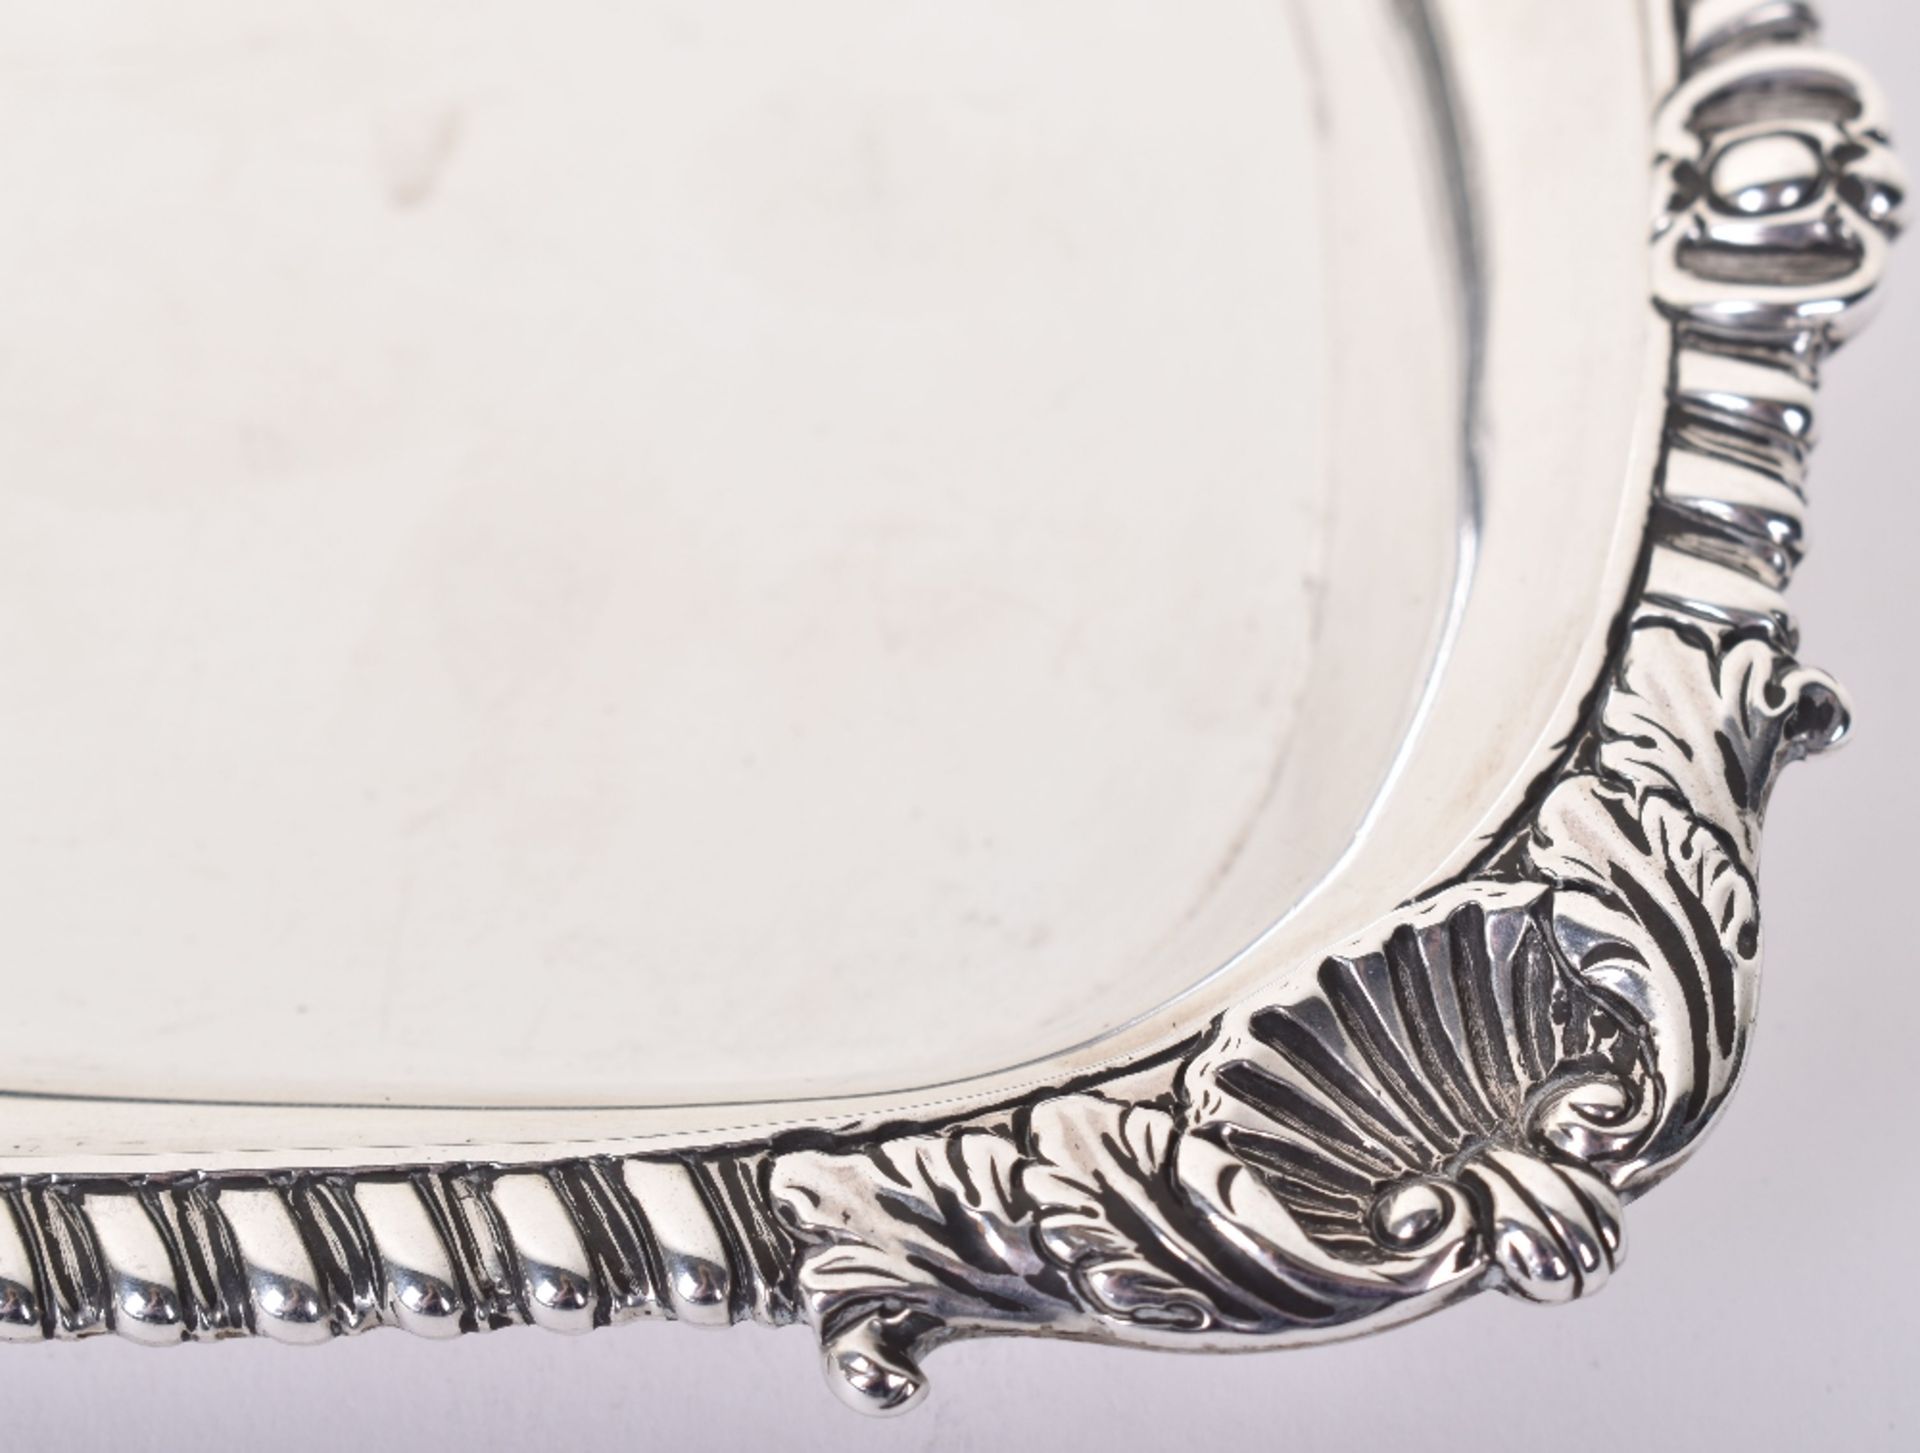 A George III silver snuffer tray, by Thomas Robbins, London 1807 - Image 3 of 5